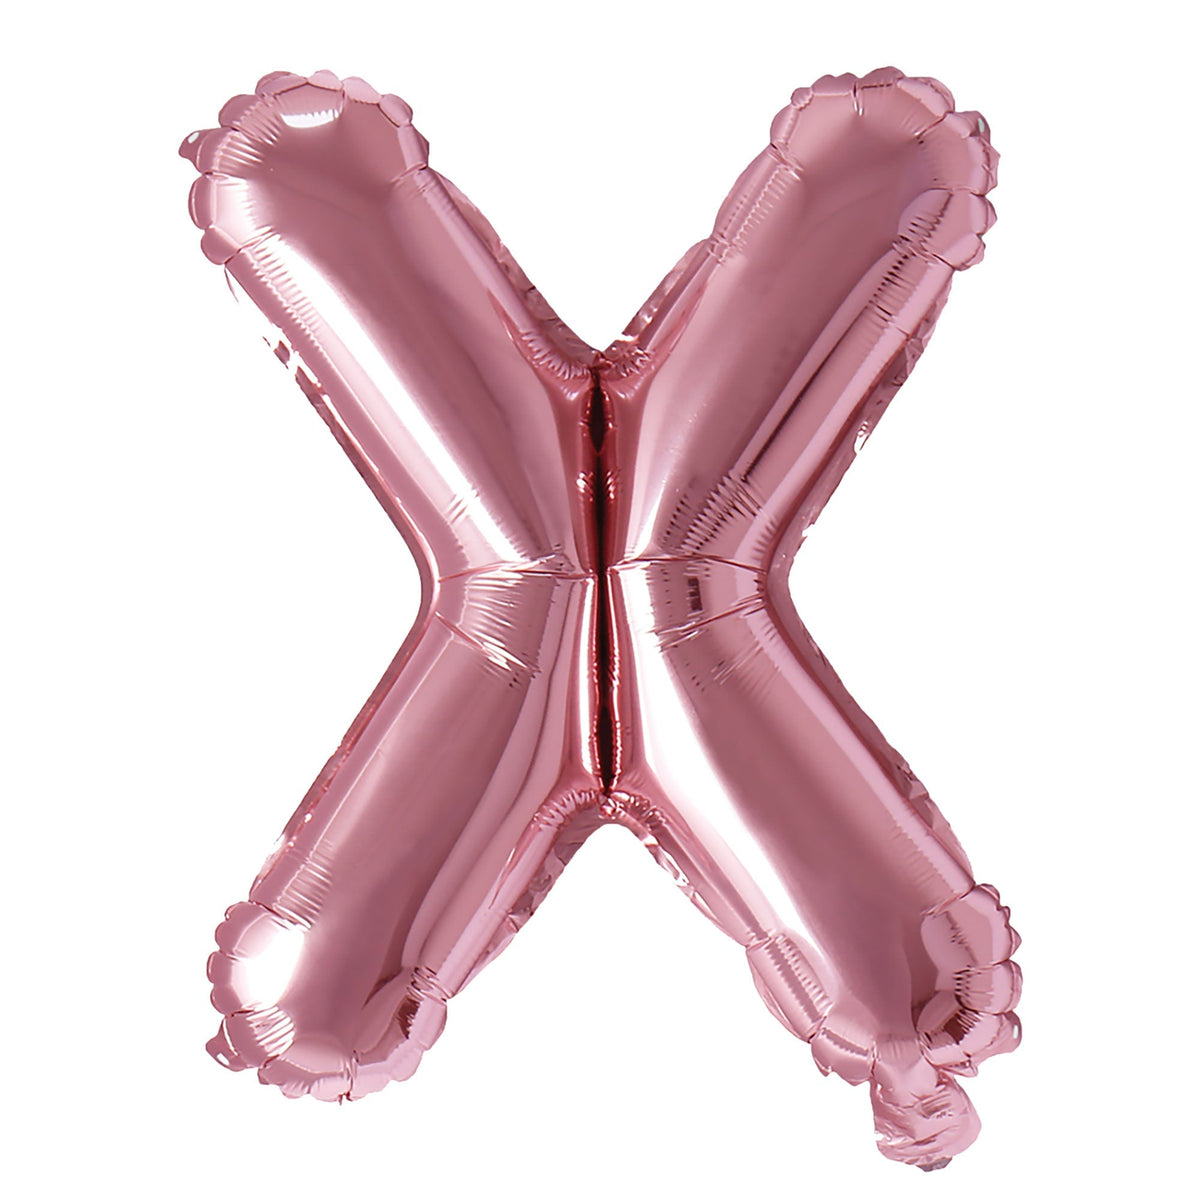 PARTY EXPERT Balloons Rose Gold Letter X Foil Balloon, 16 Inches, 1 Count 810064194429